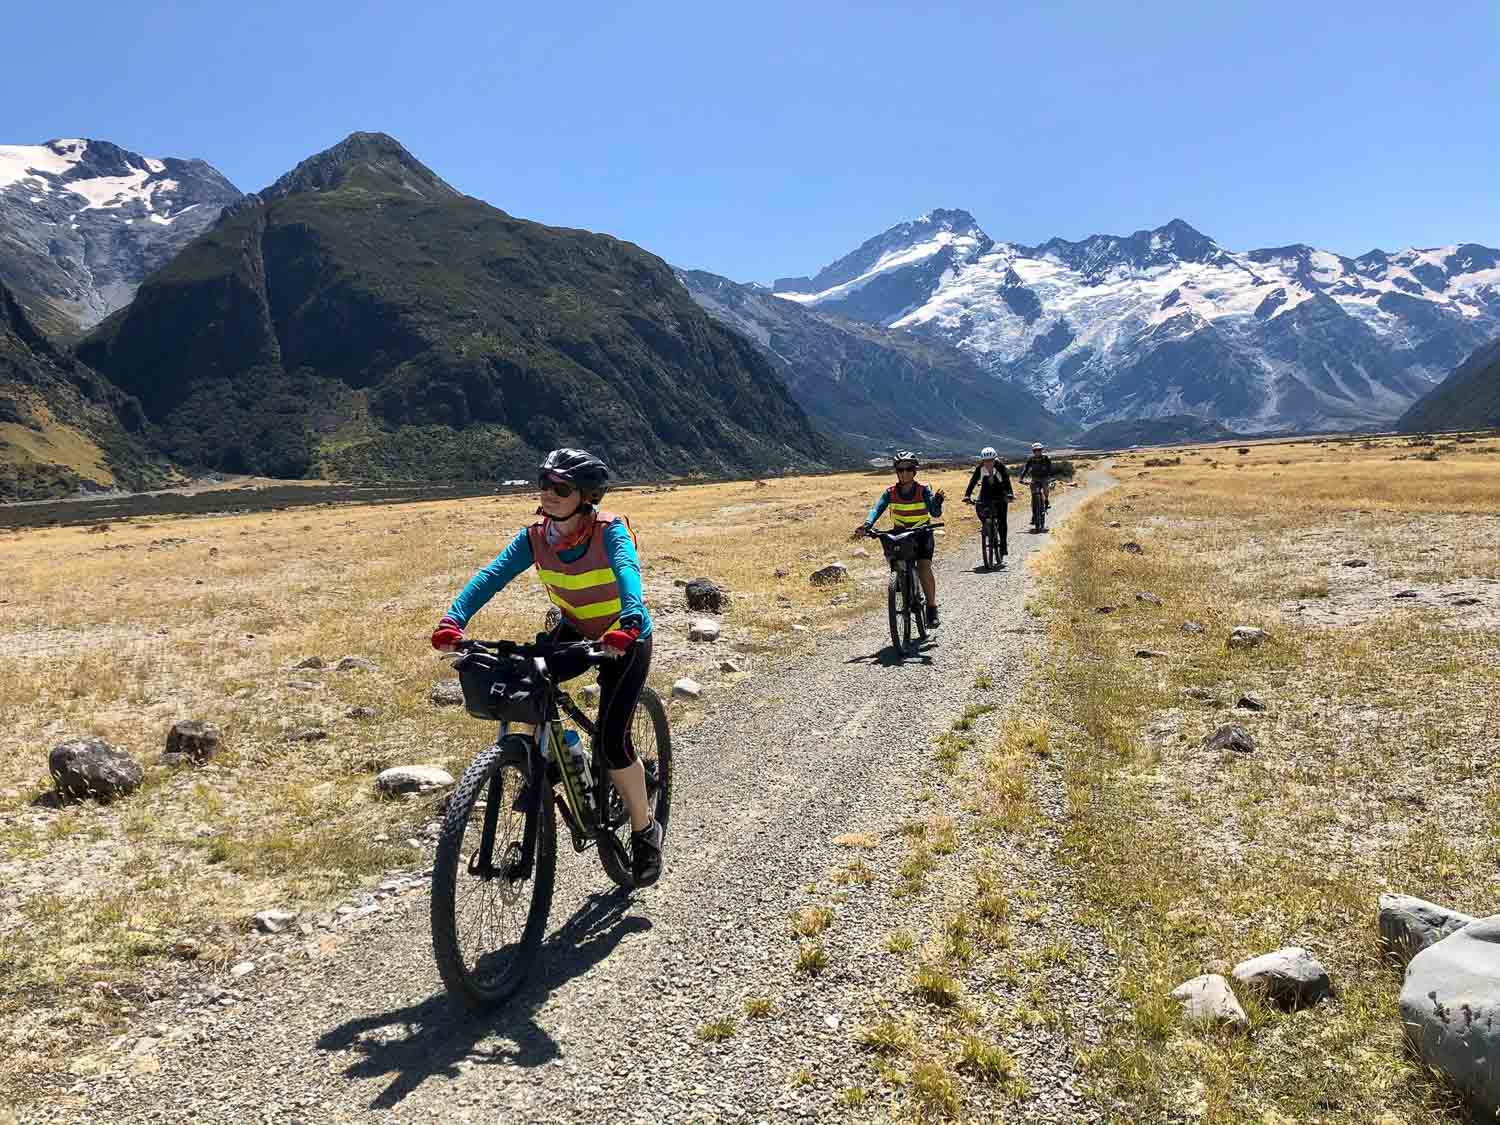 A cycling tour in Alps 2 Ocean